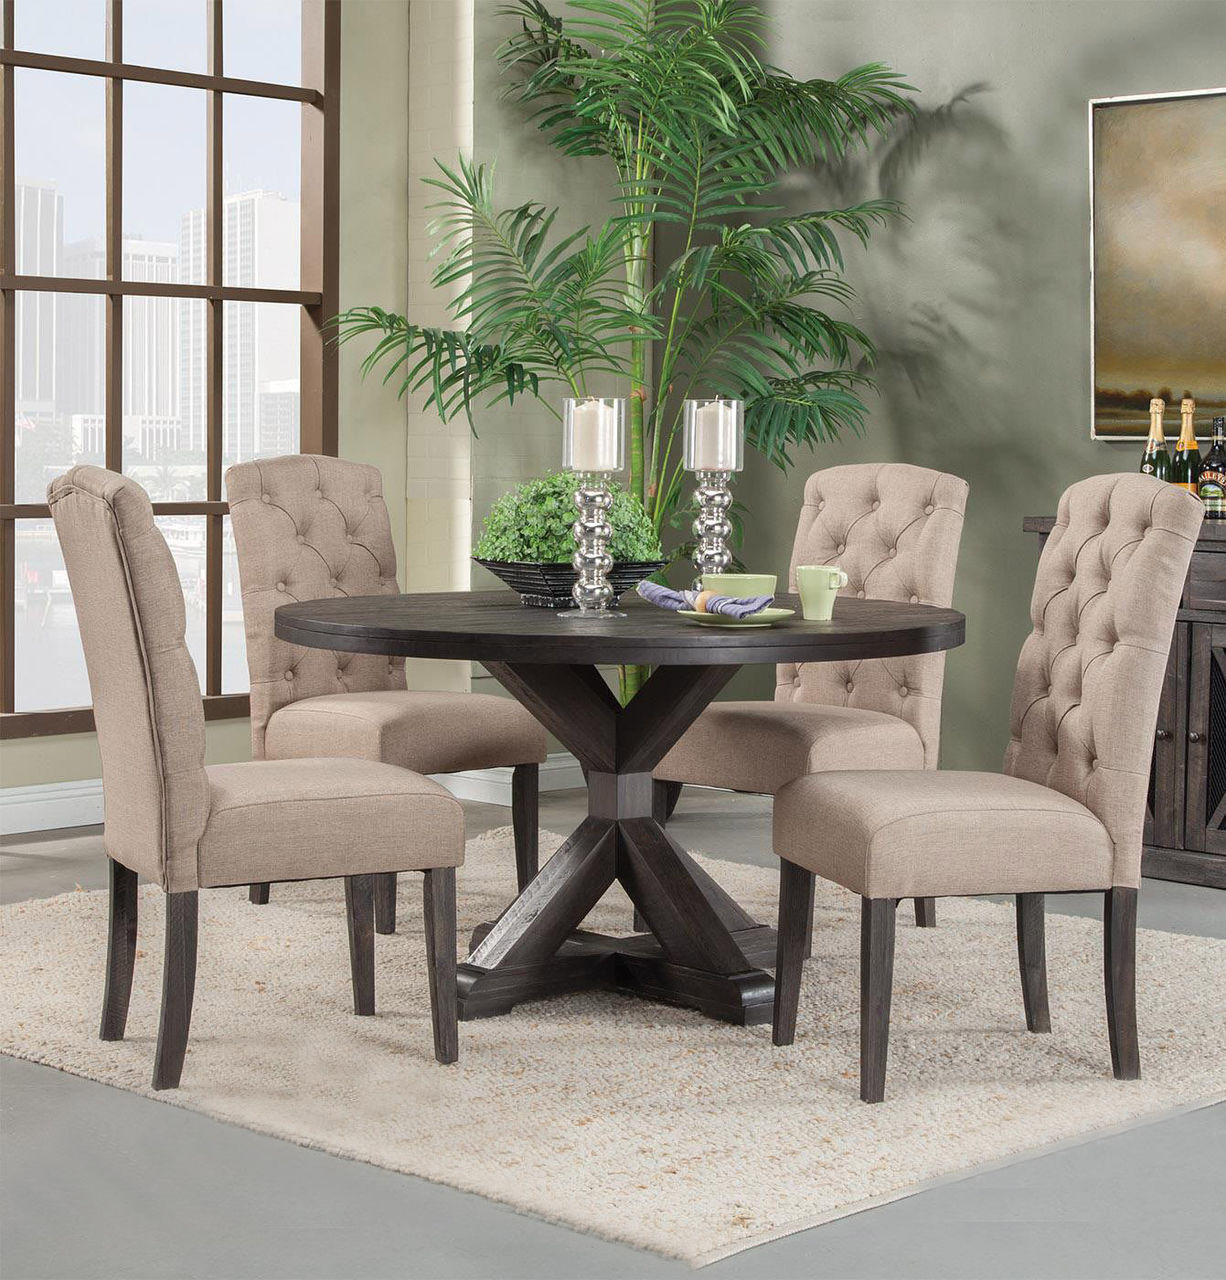 Rustic Dining Table And Chair Sets, Rustic Round Dining Table And Chairs